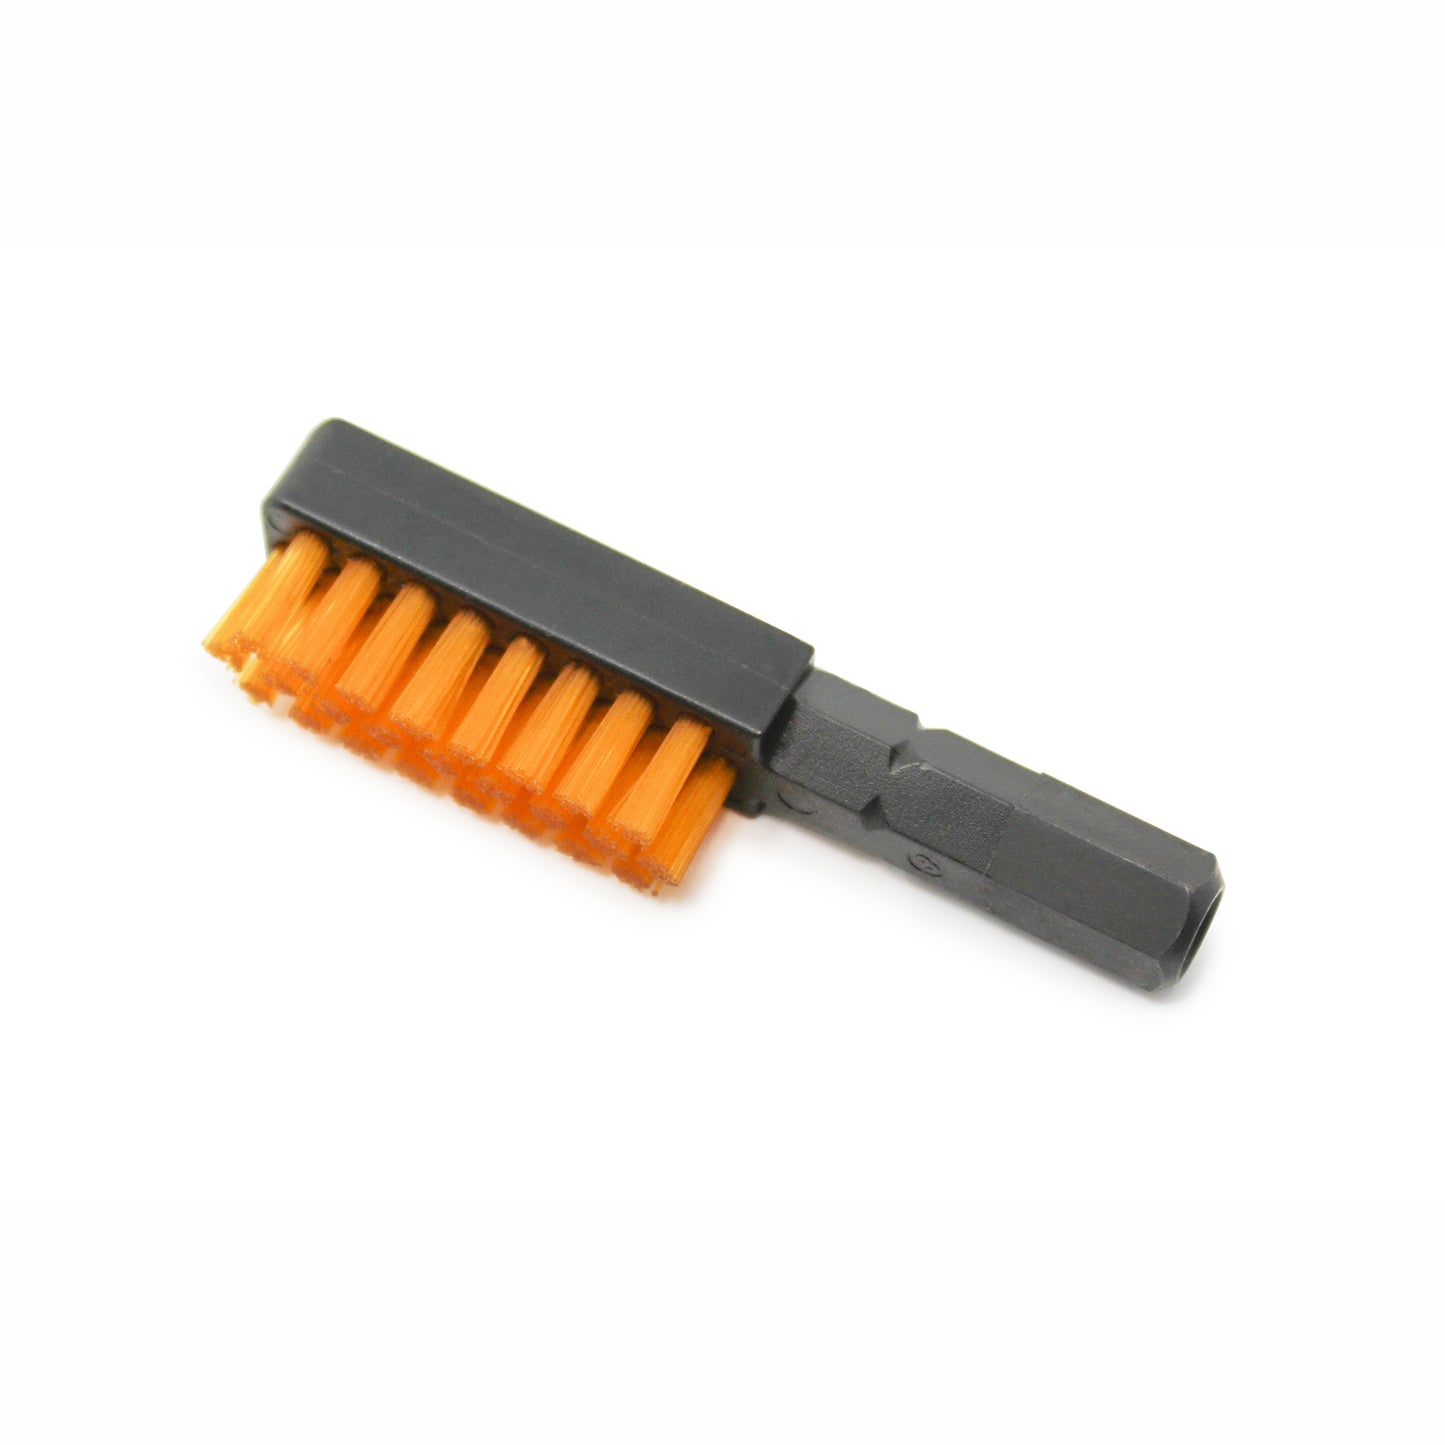 Prestacycle Chain Cleaning & Lubricating Brush Bit